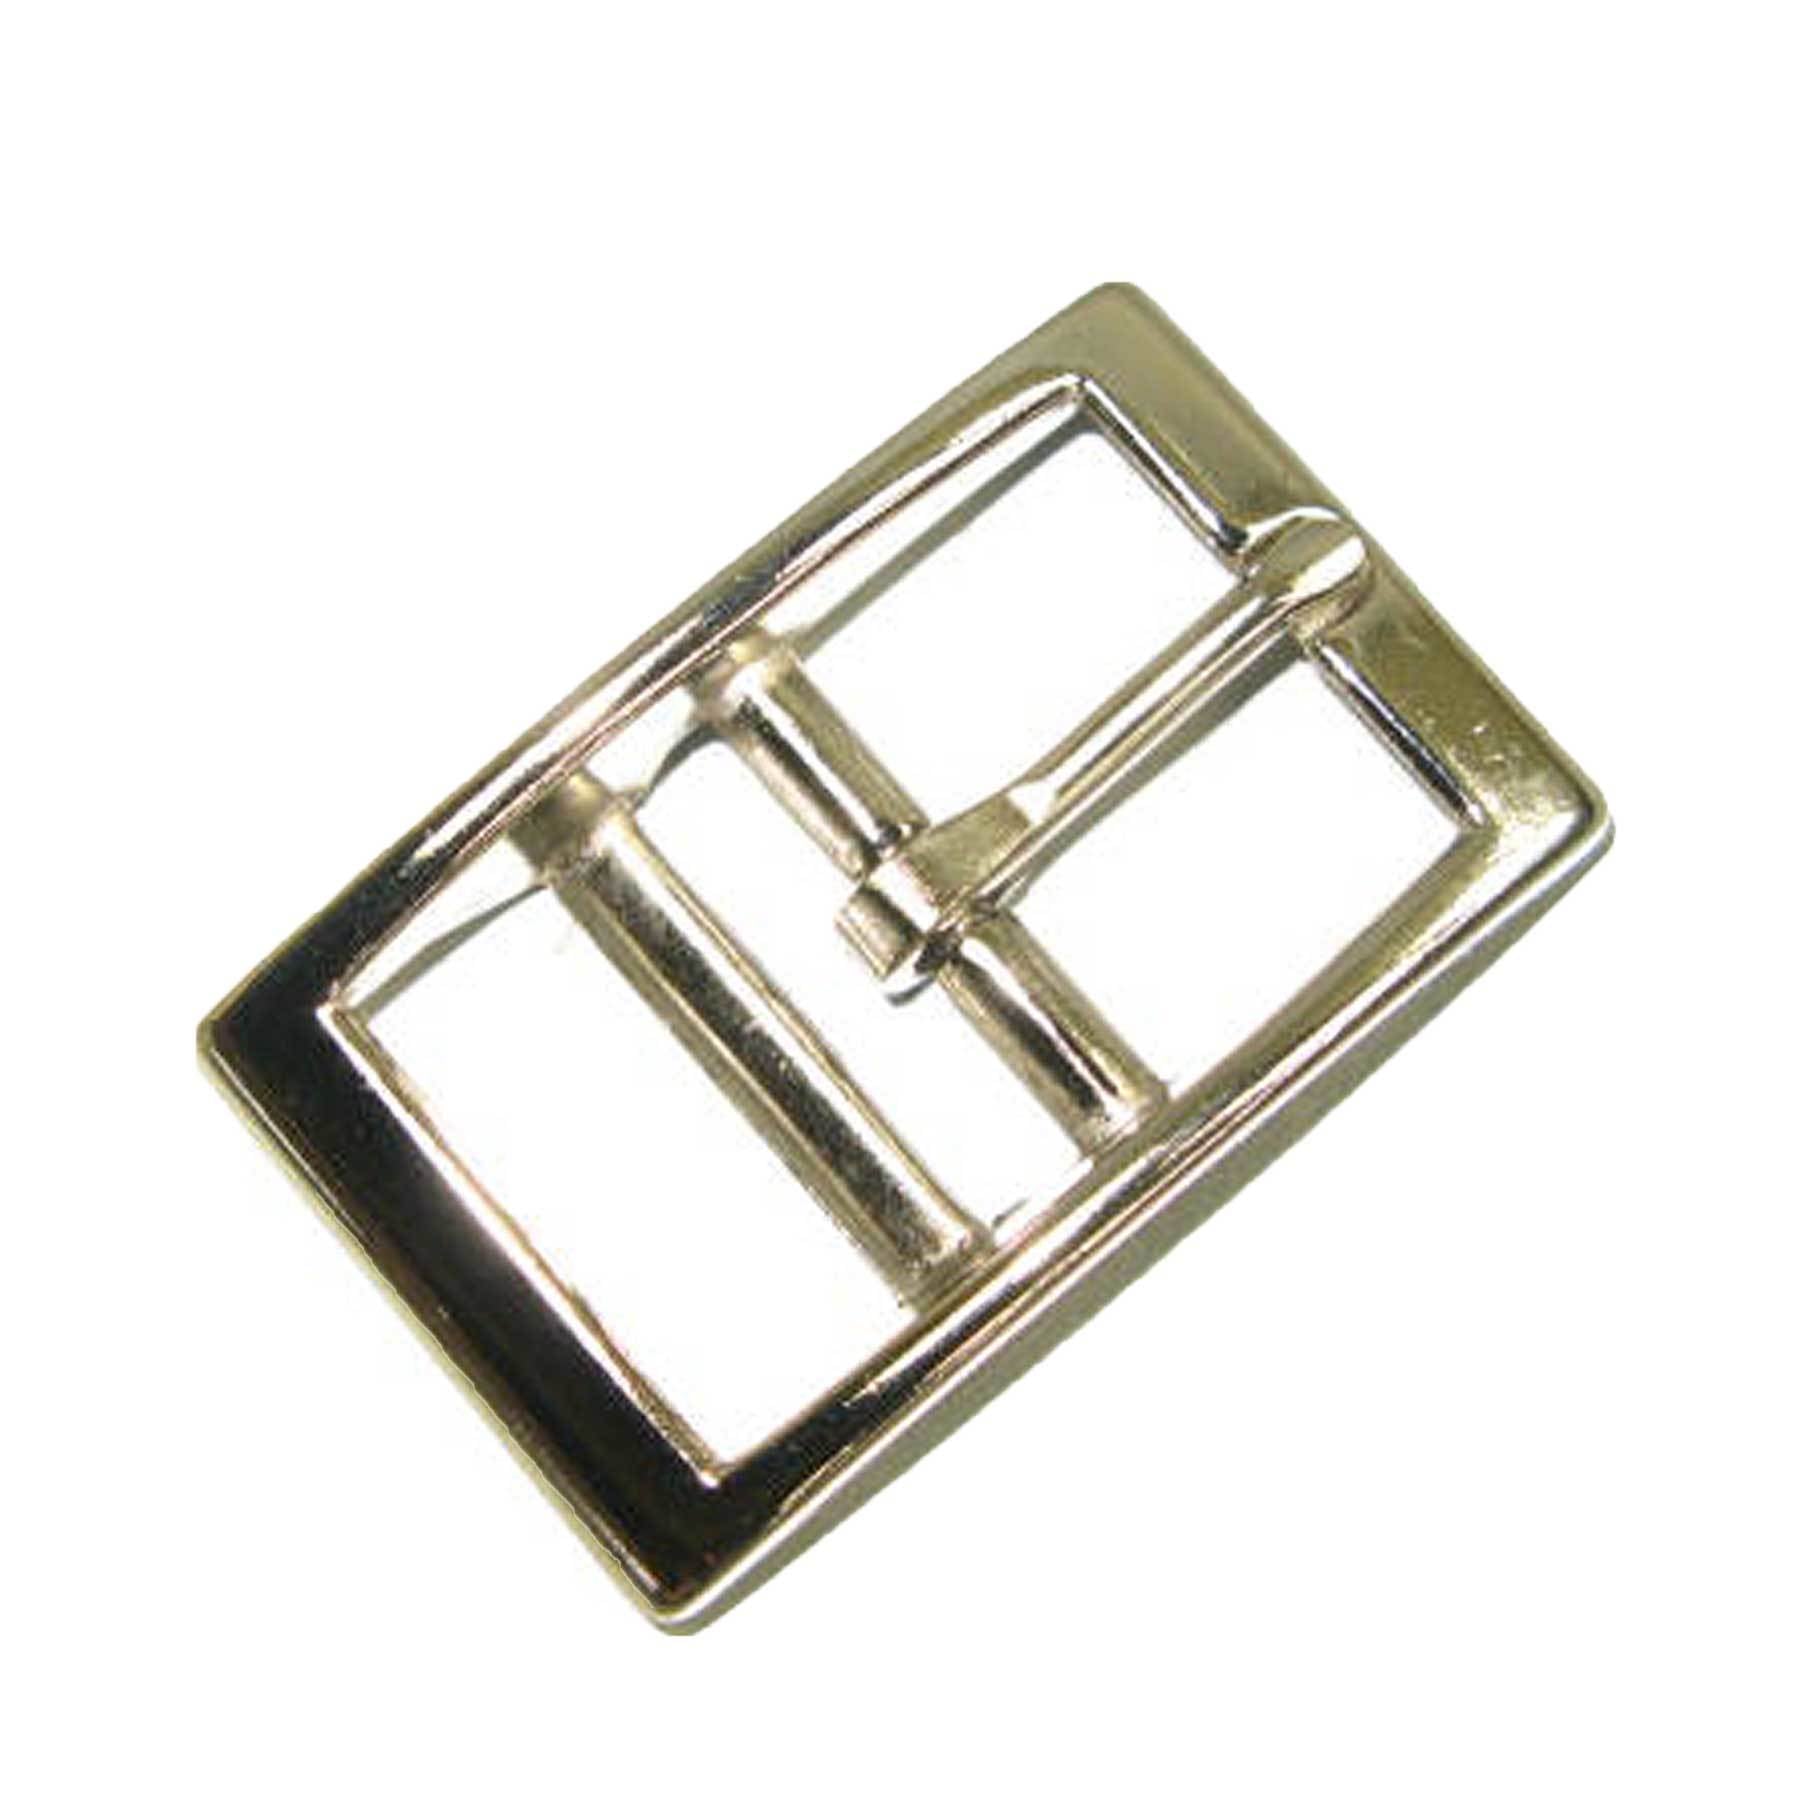 Nickel Plated Steel Double Bar Buckle 1514-00 Strap Buckle Leathercraf ...